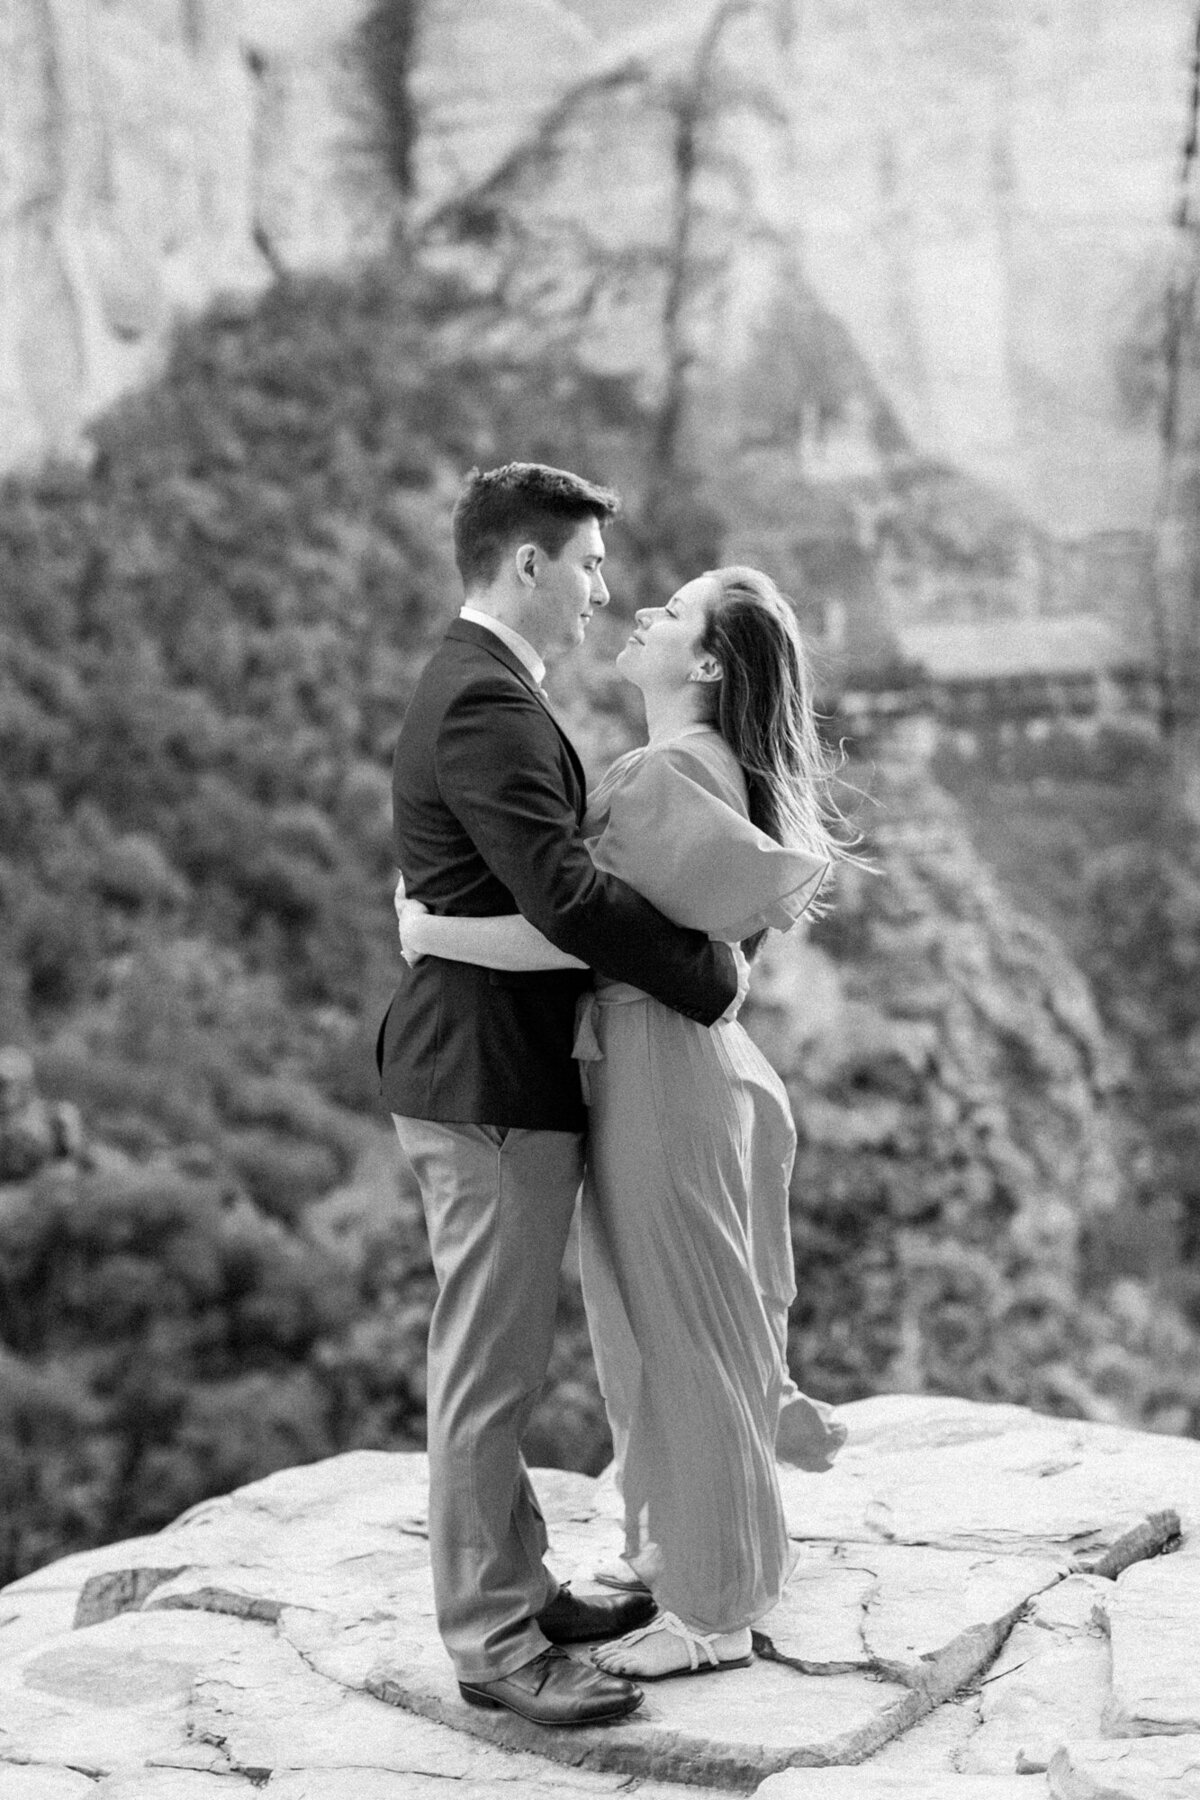 A black and white engagement photo taken at Cathedral Rock in Sedona at sunset.